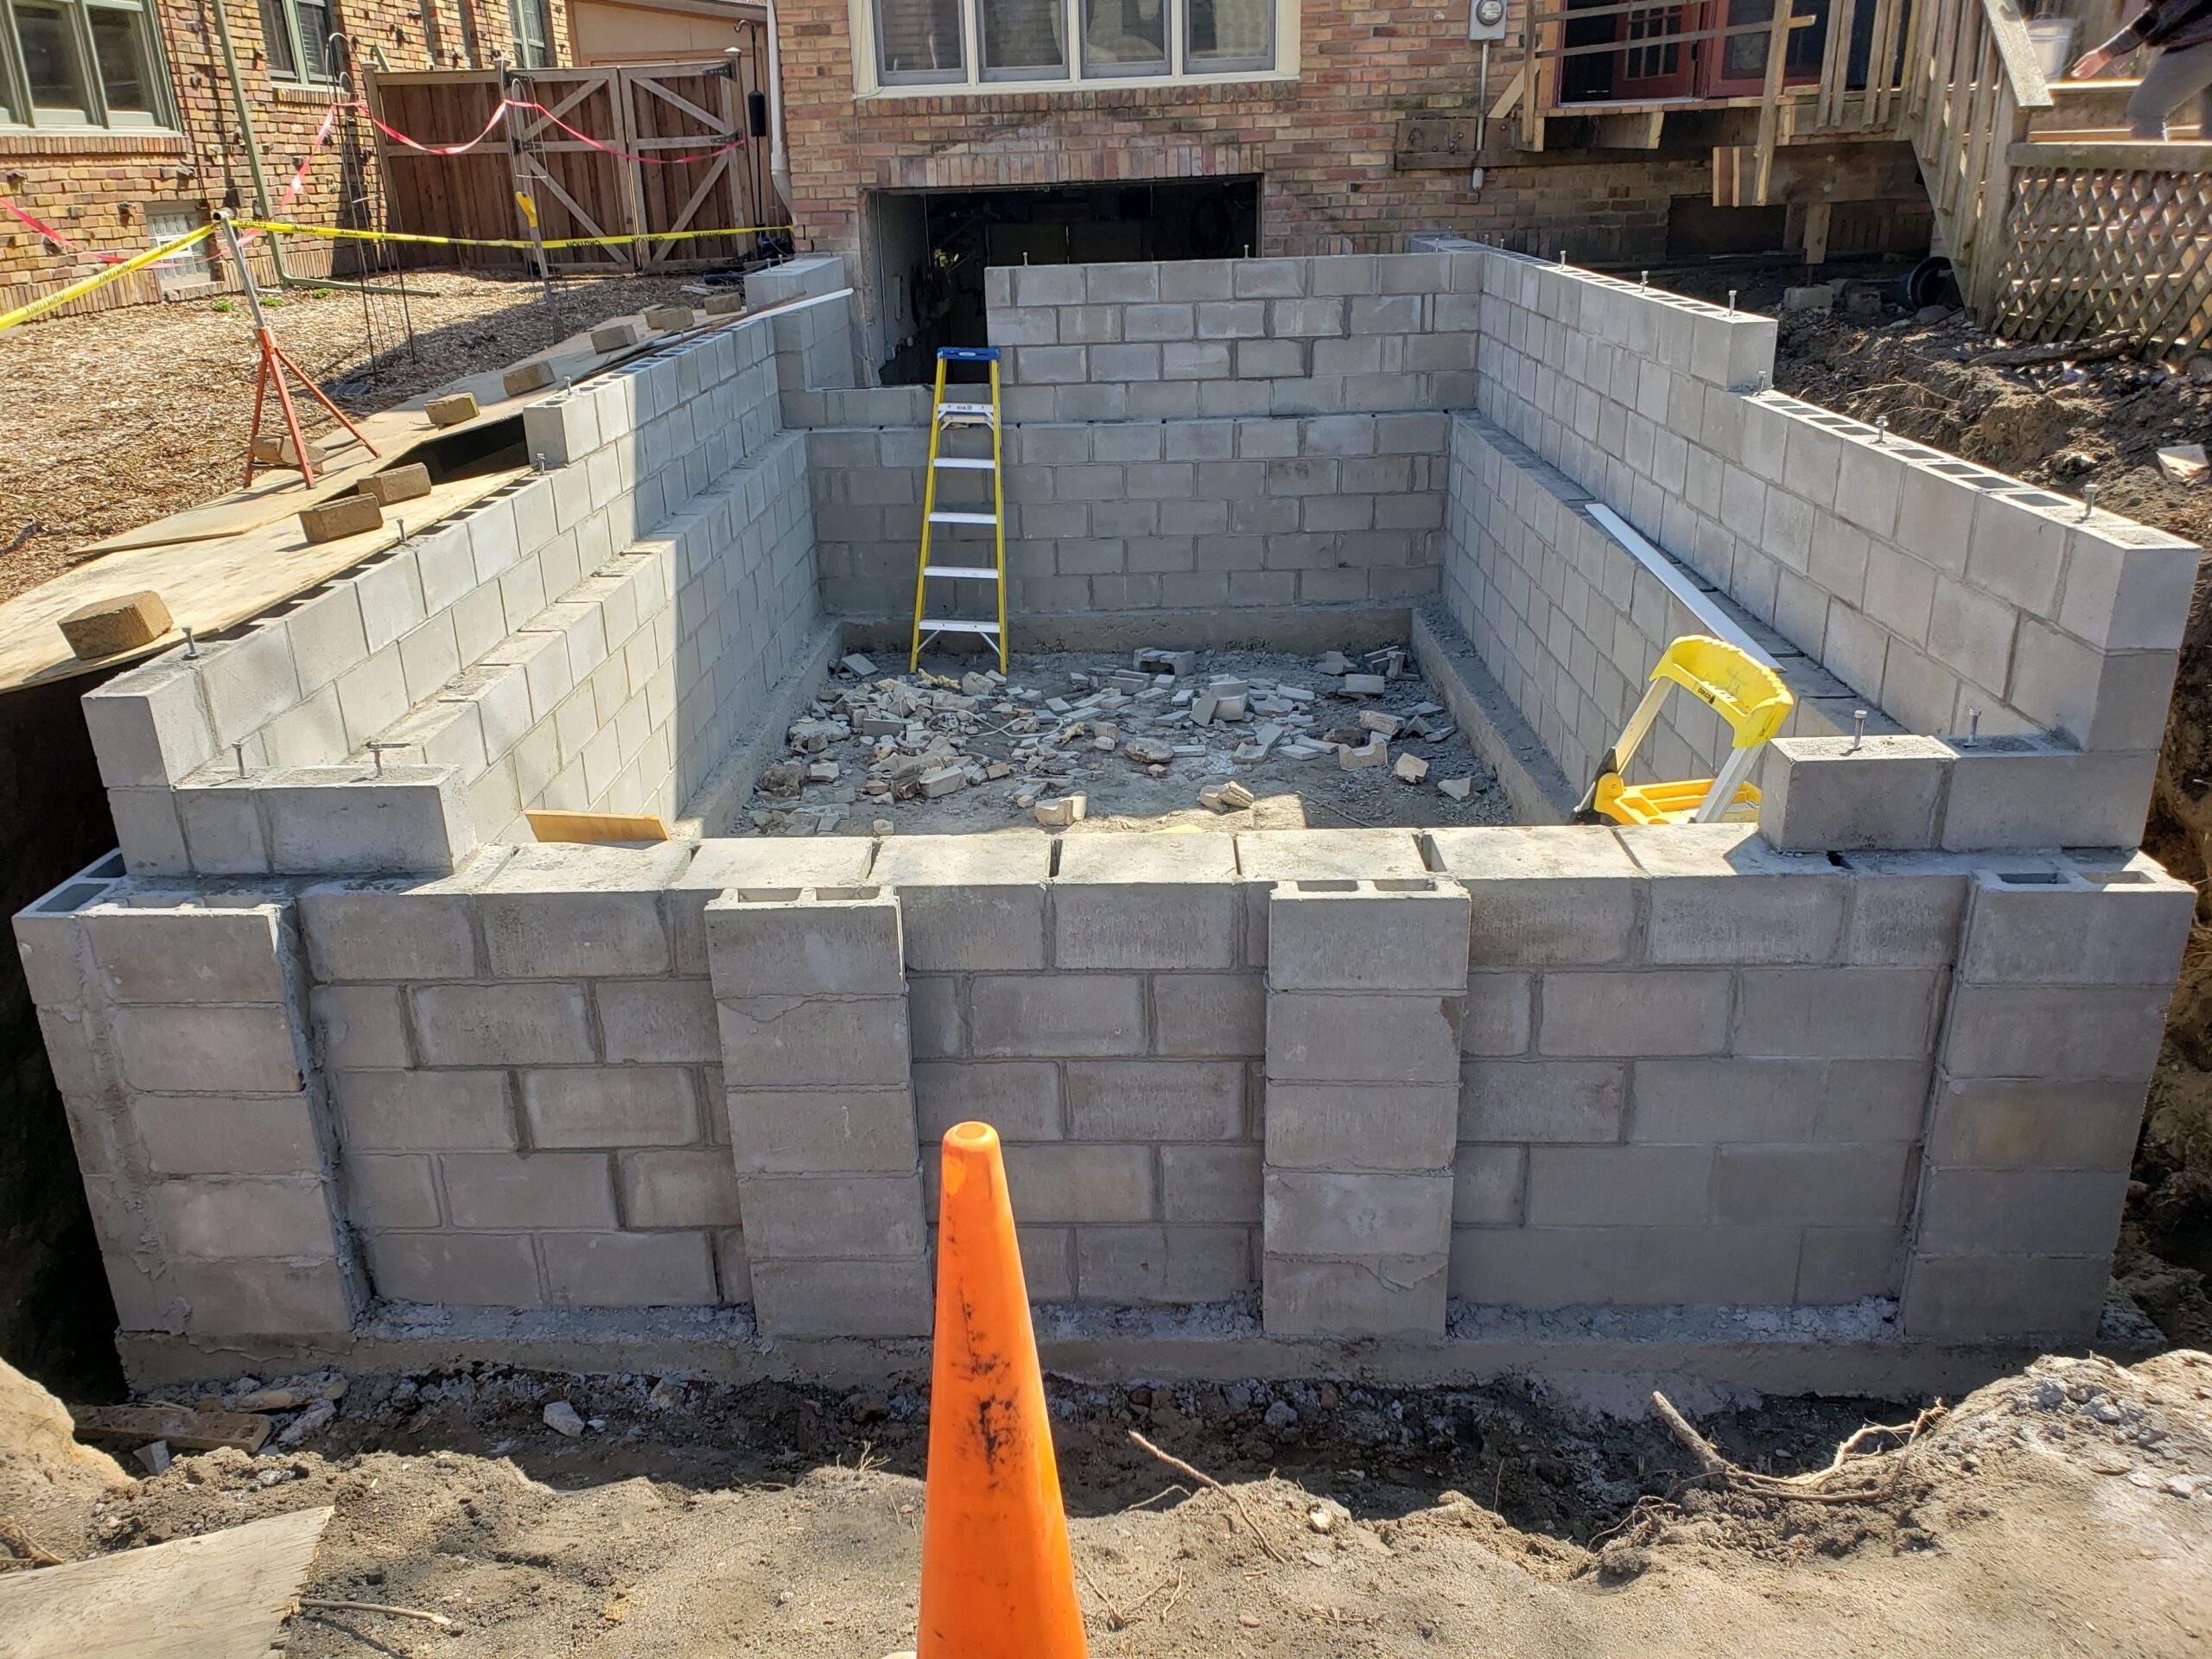 Foundation Blockwork Masonry and Concrete Pouring services for residential and commercial applications from Voehl Construction Inc.